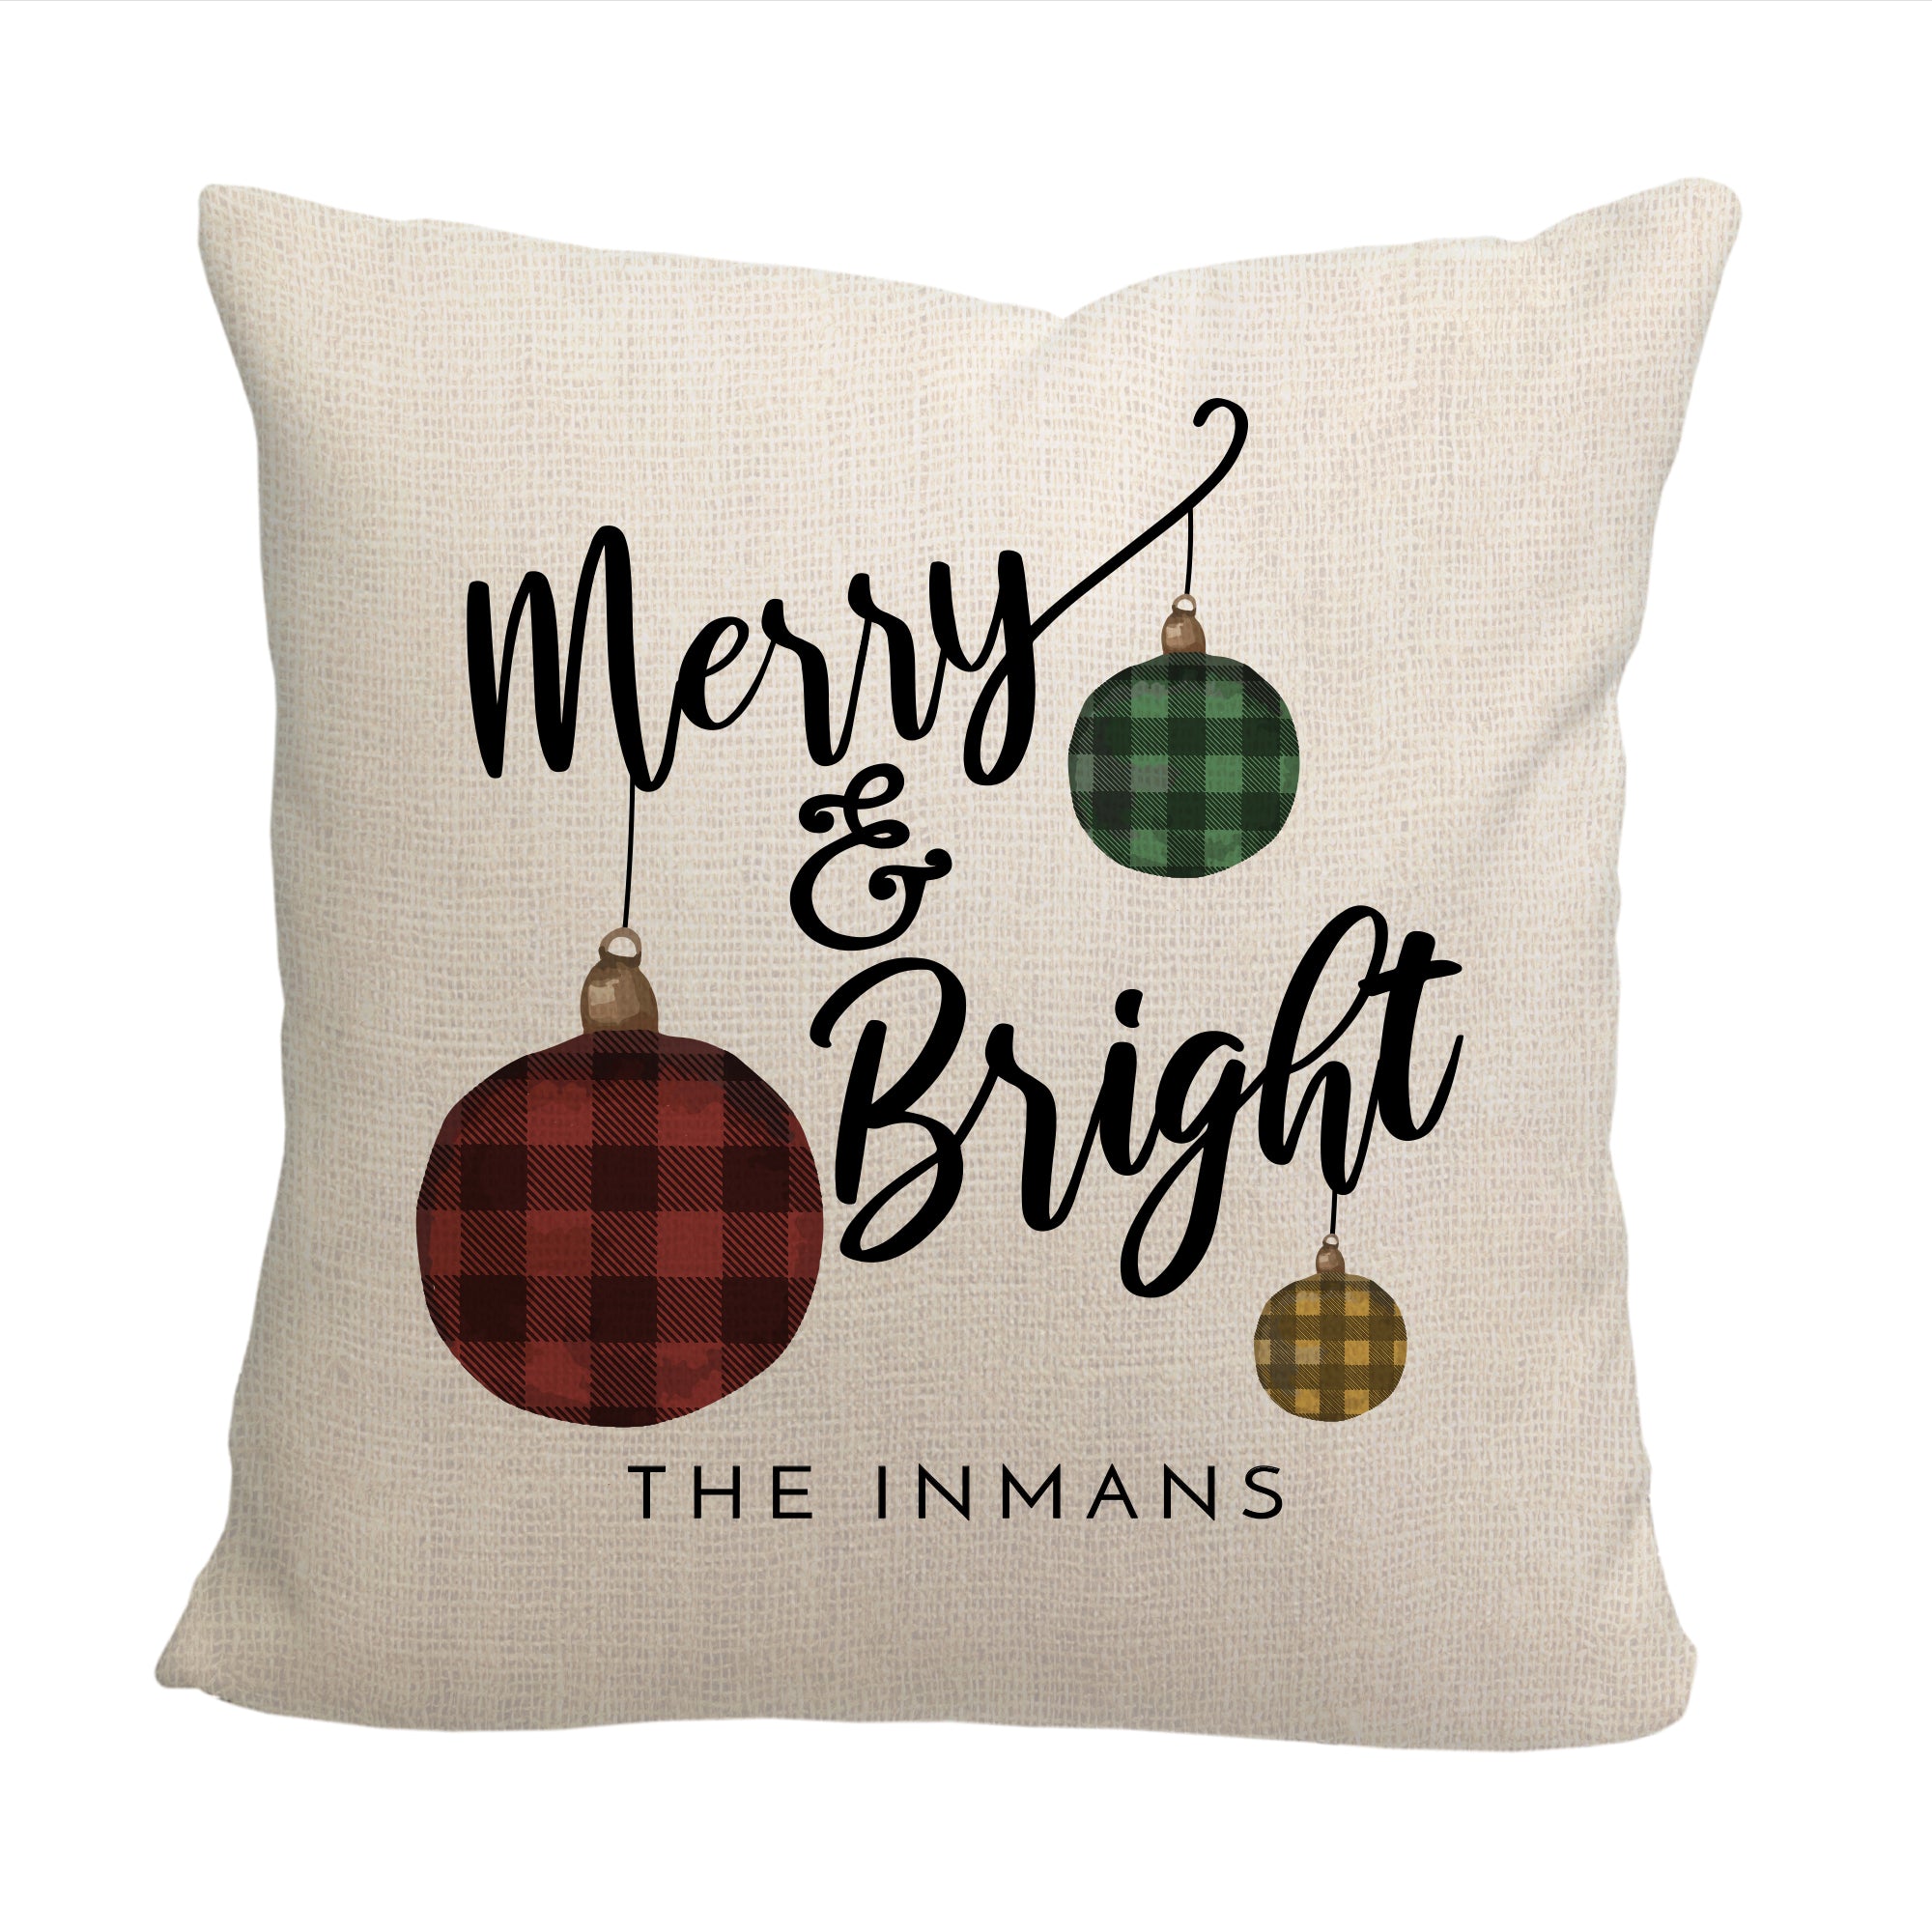 Merry and Bright Throw Pillow - Cover Only OR Cover with Insert